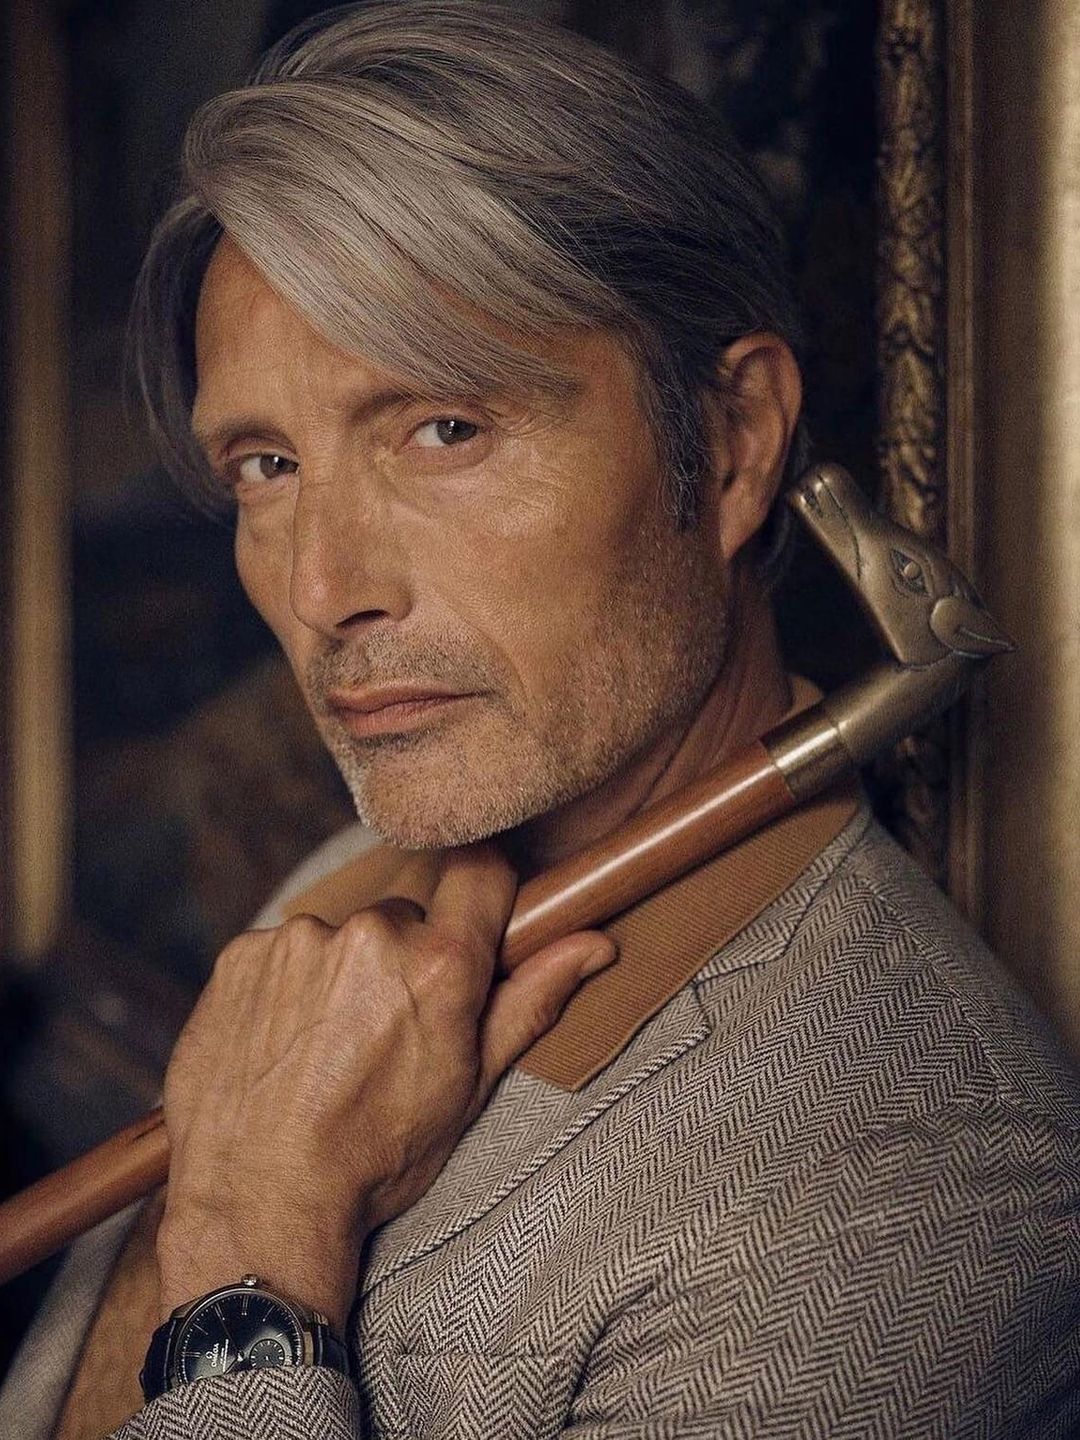 Mads Mikkelsen in his youth